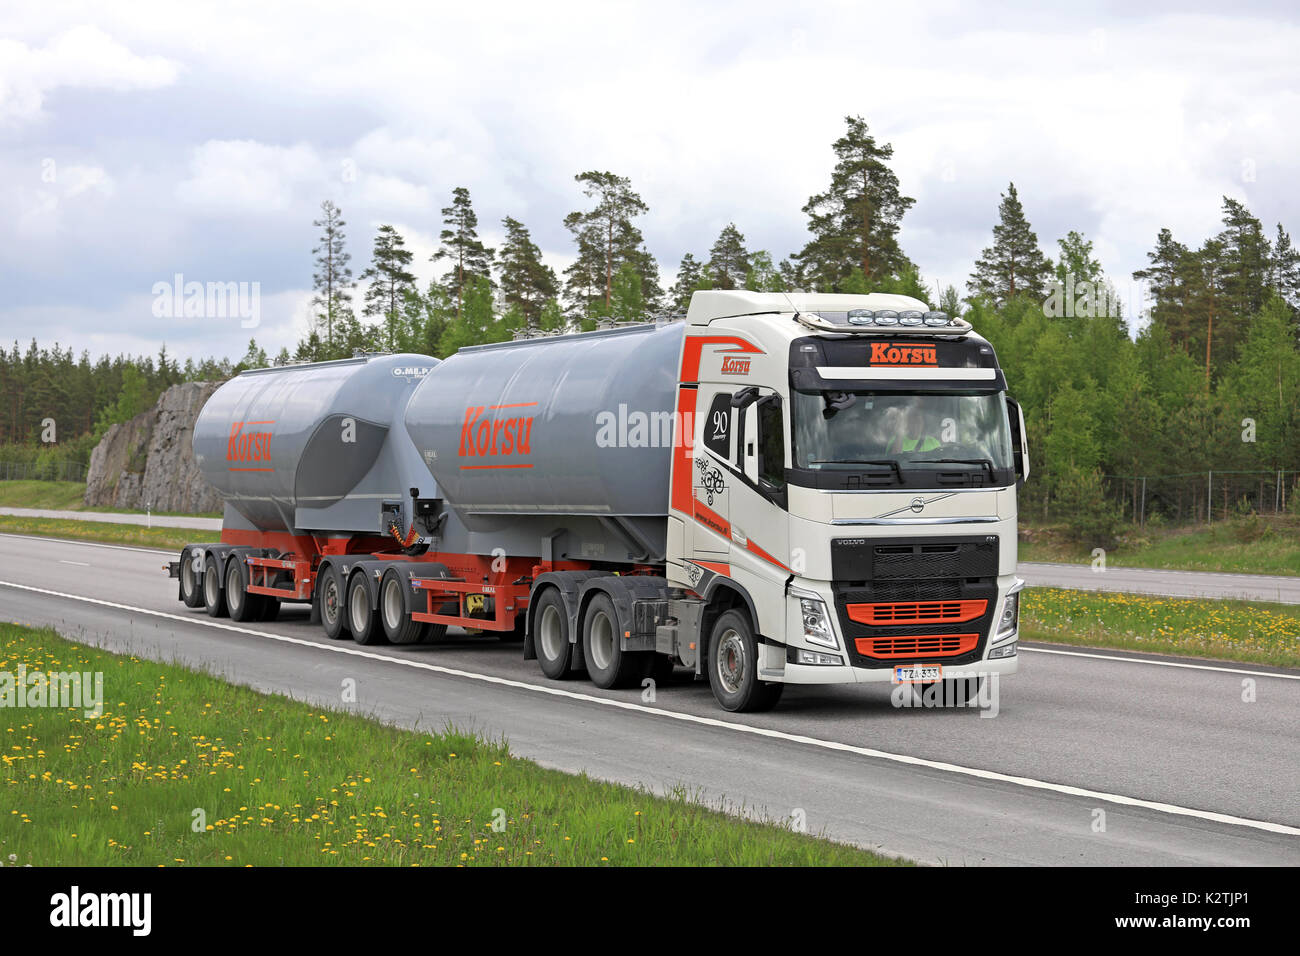 PAIMIO, FINLAND - JUNE 9, 2017: Orange and White Volvo FH tank truck of Korsu Oy moves along freeway in Finnish summer scenery. Stock Photo